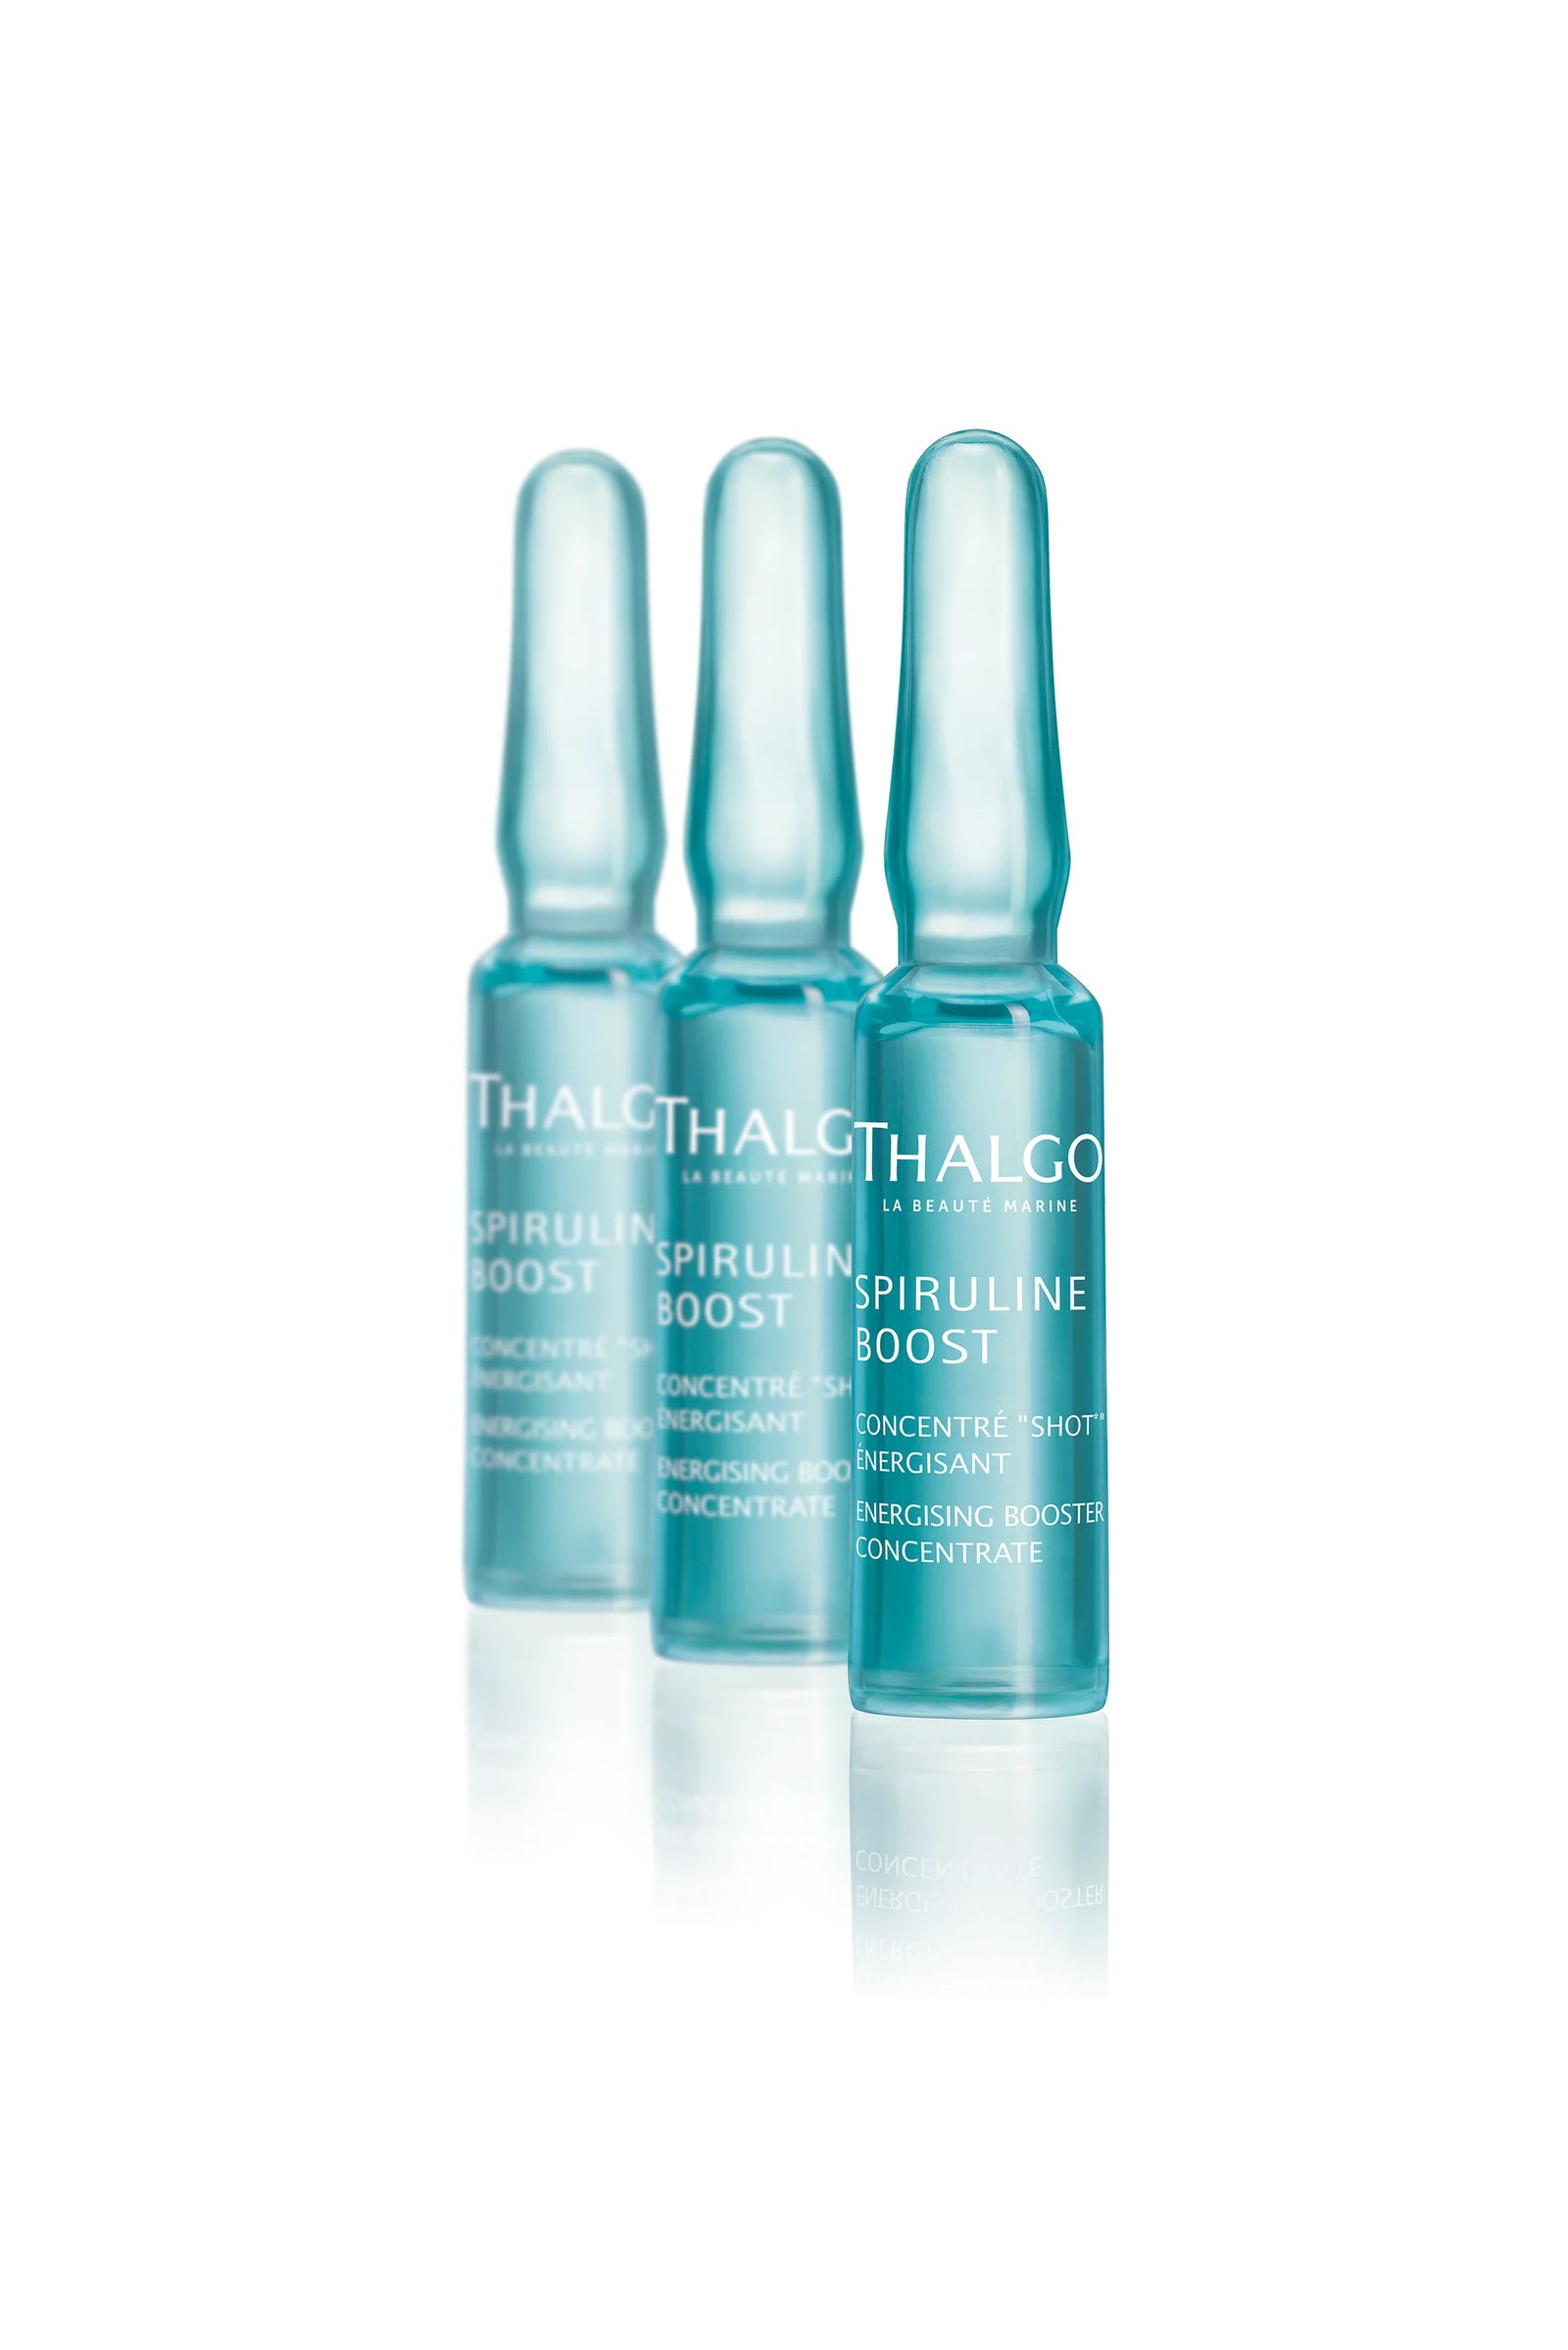 Thalgo Spiruline Boost Energising Booster Concentrate